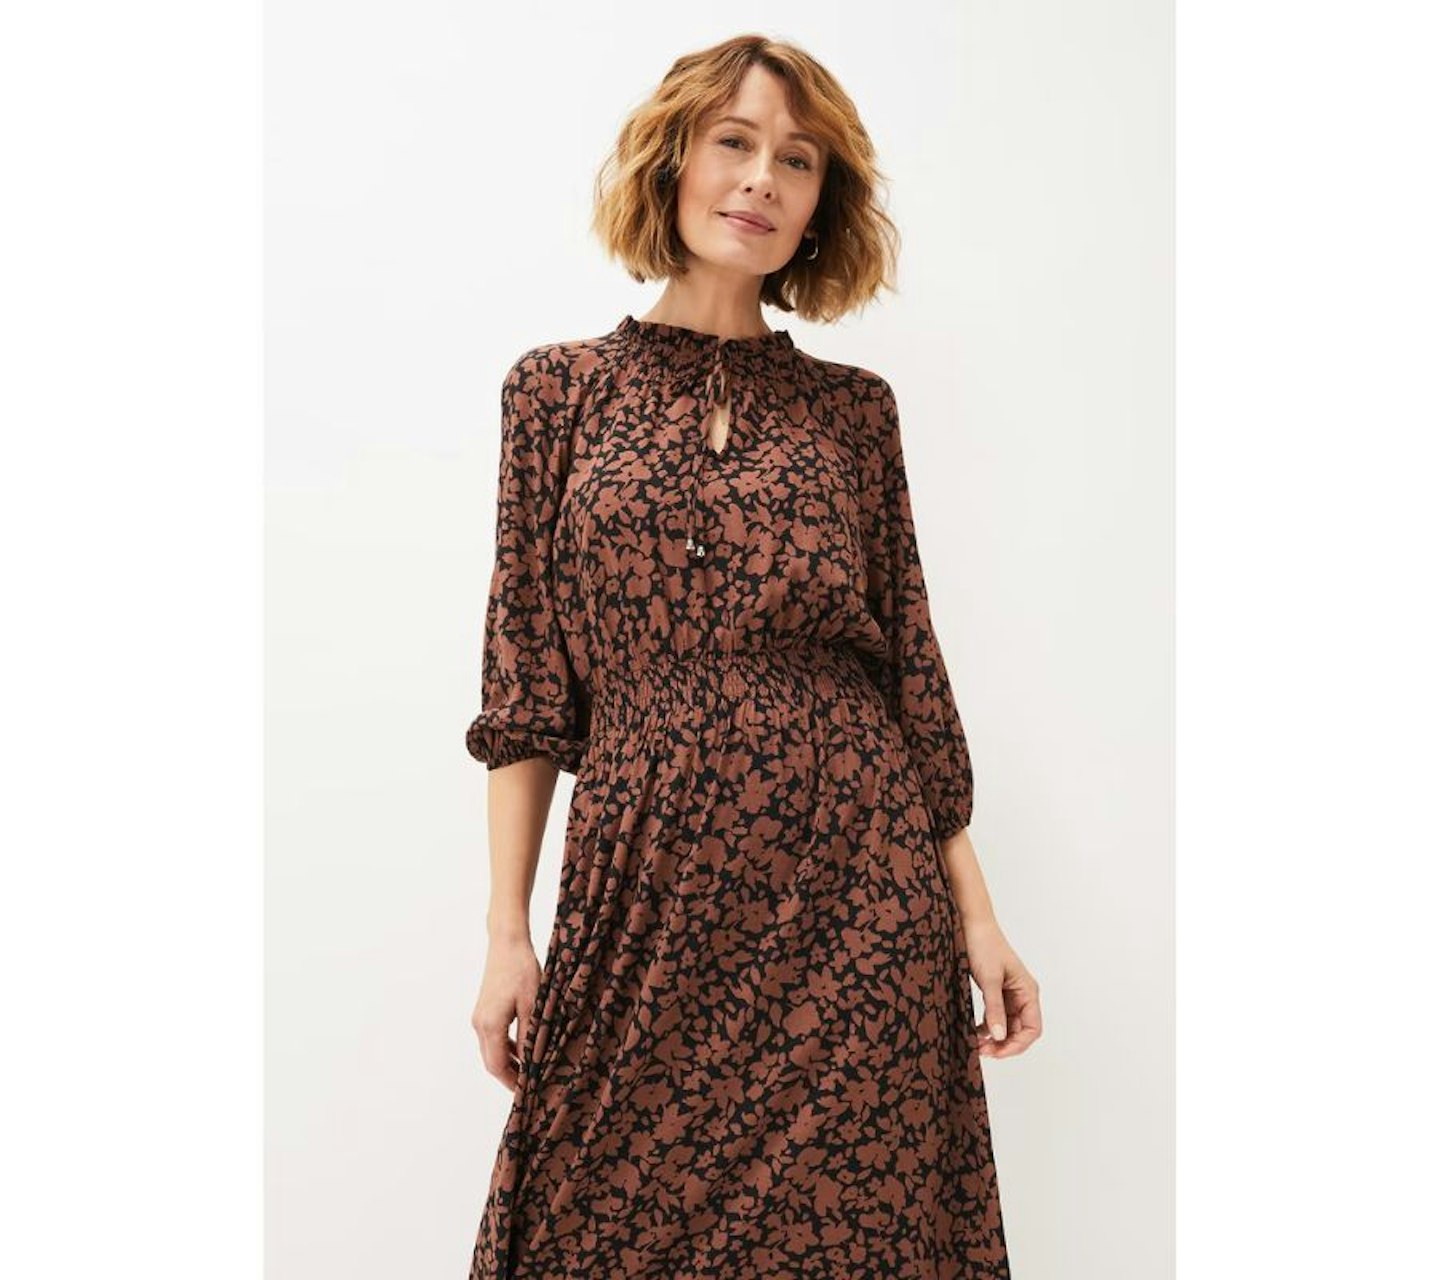 Ladies' dresses for over 50s that are flattering 2024